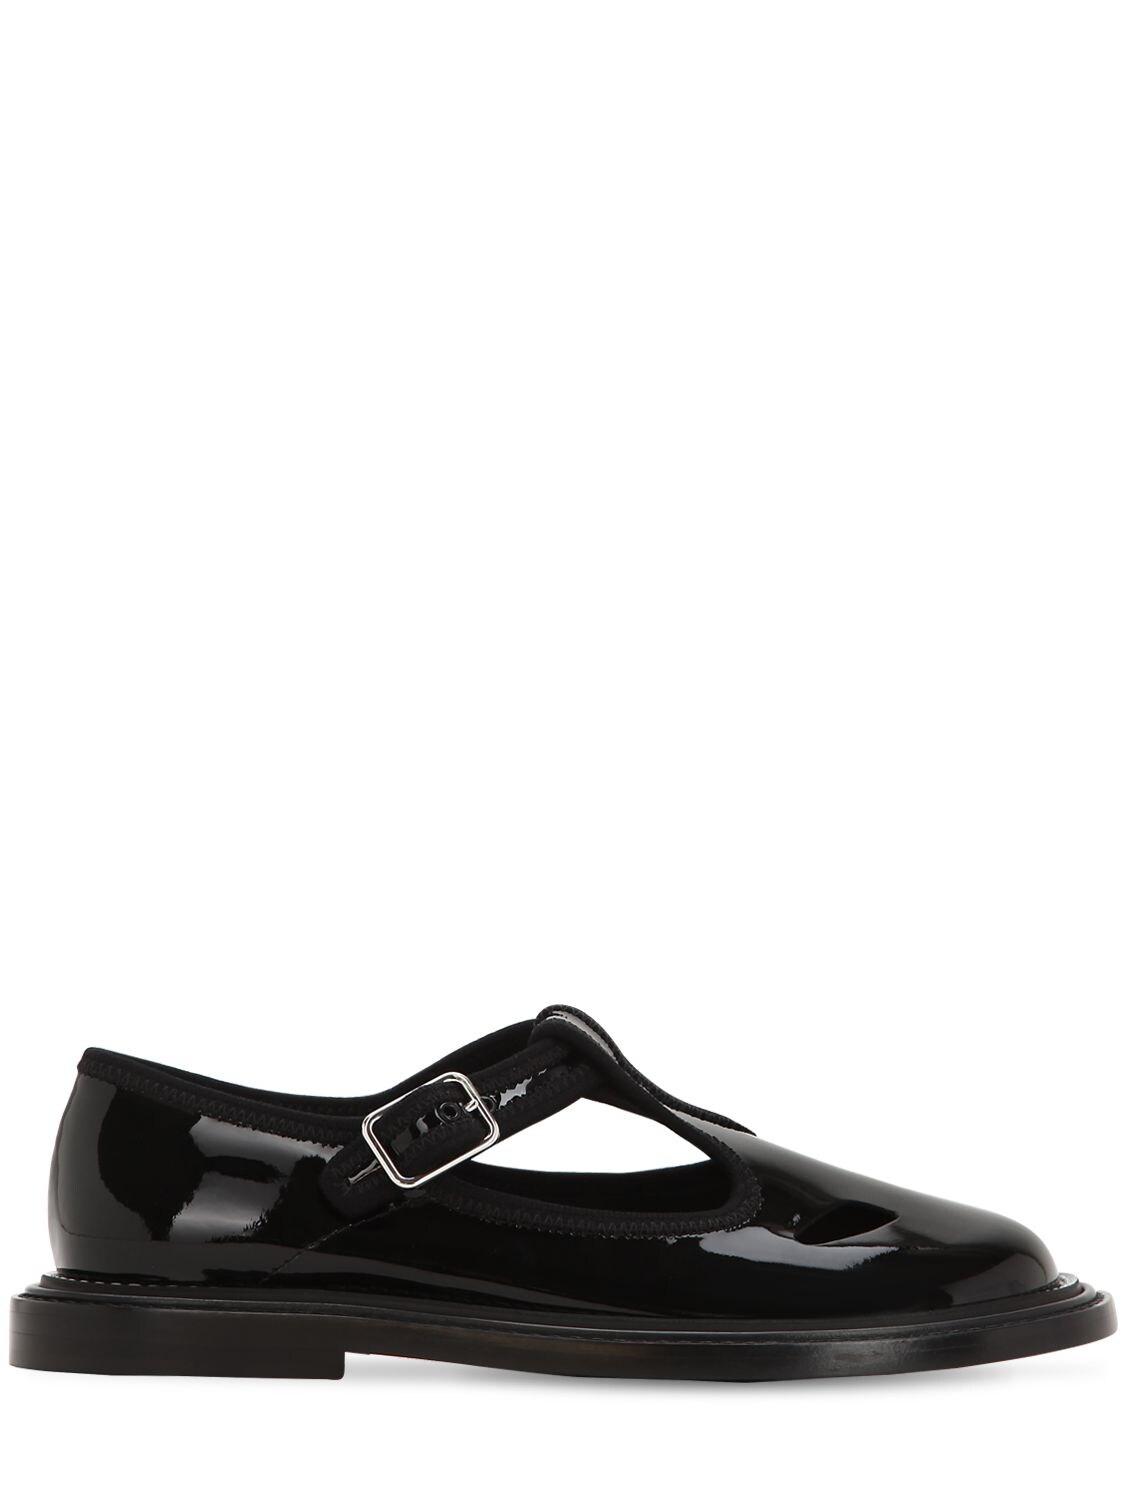 Burberry Black Patent Leather T-bar Shoes | Lyst